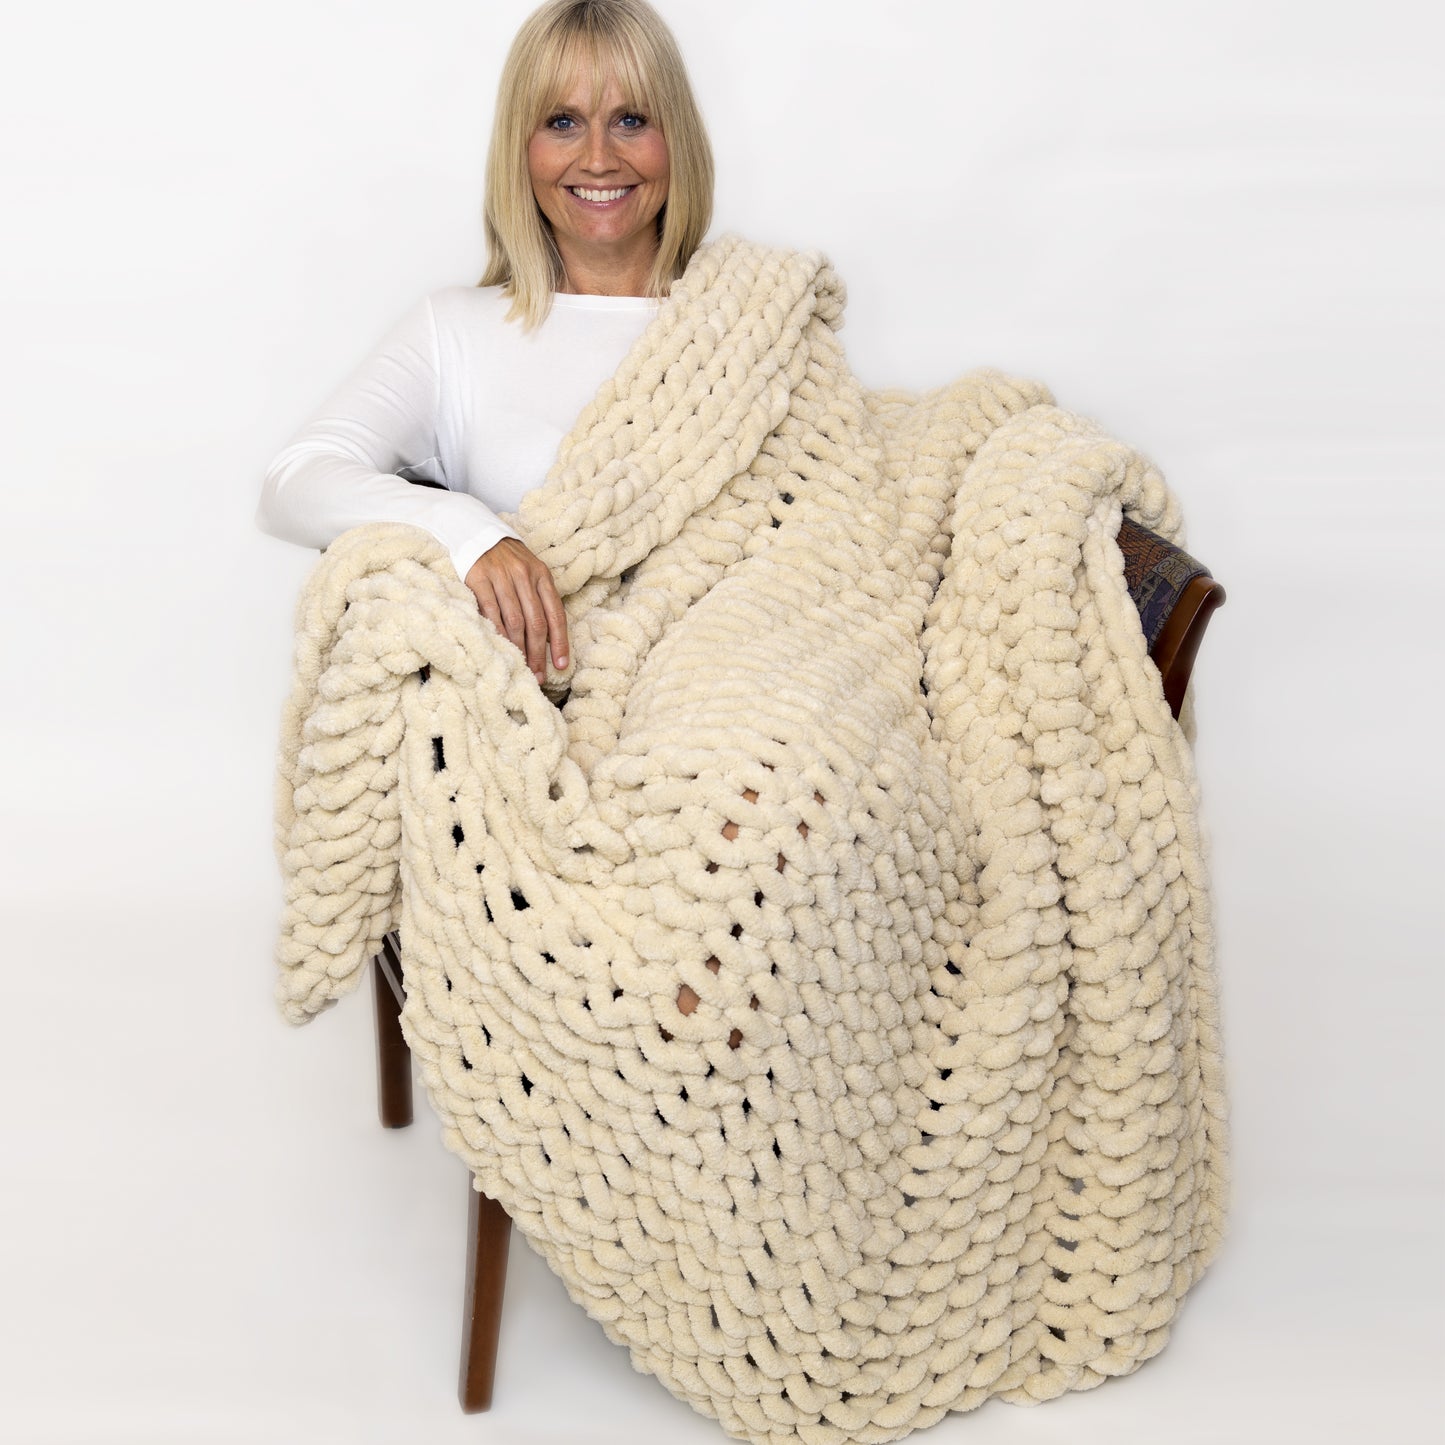 Chunky Knit Chenille throw off-white, 50 x 60 inches